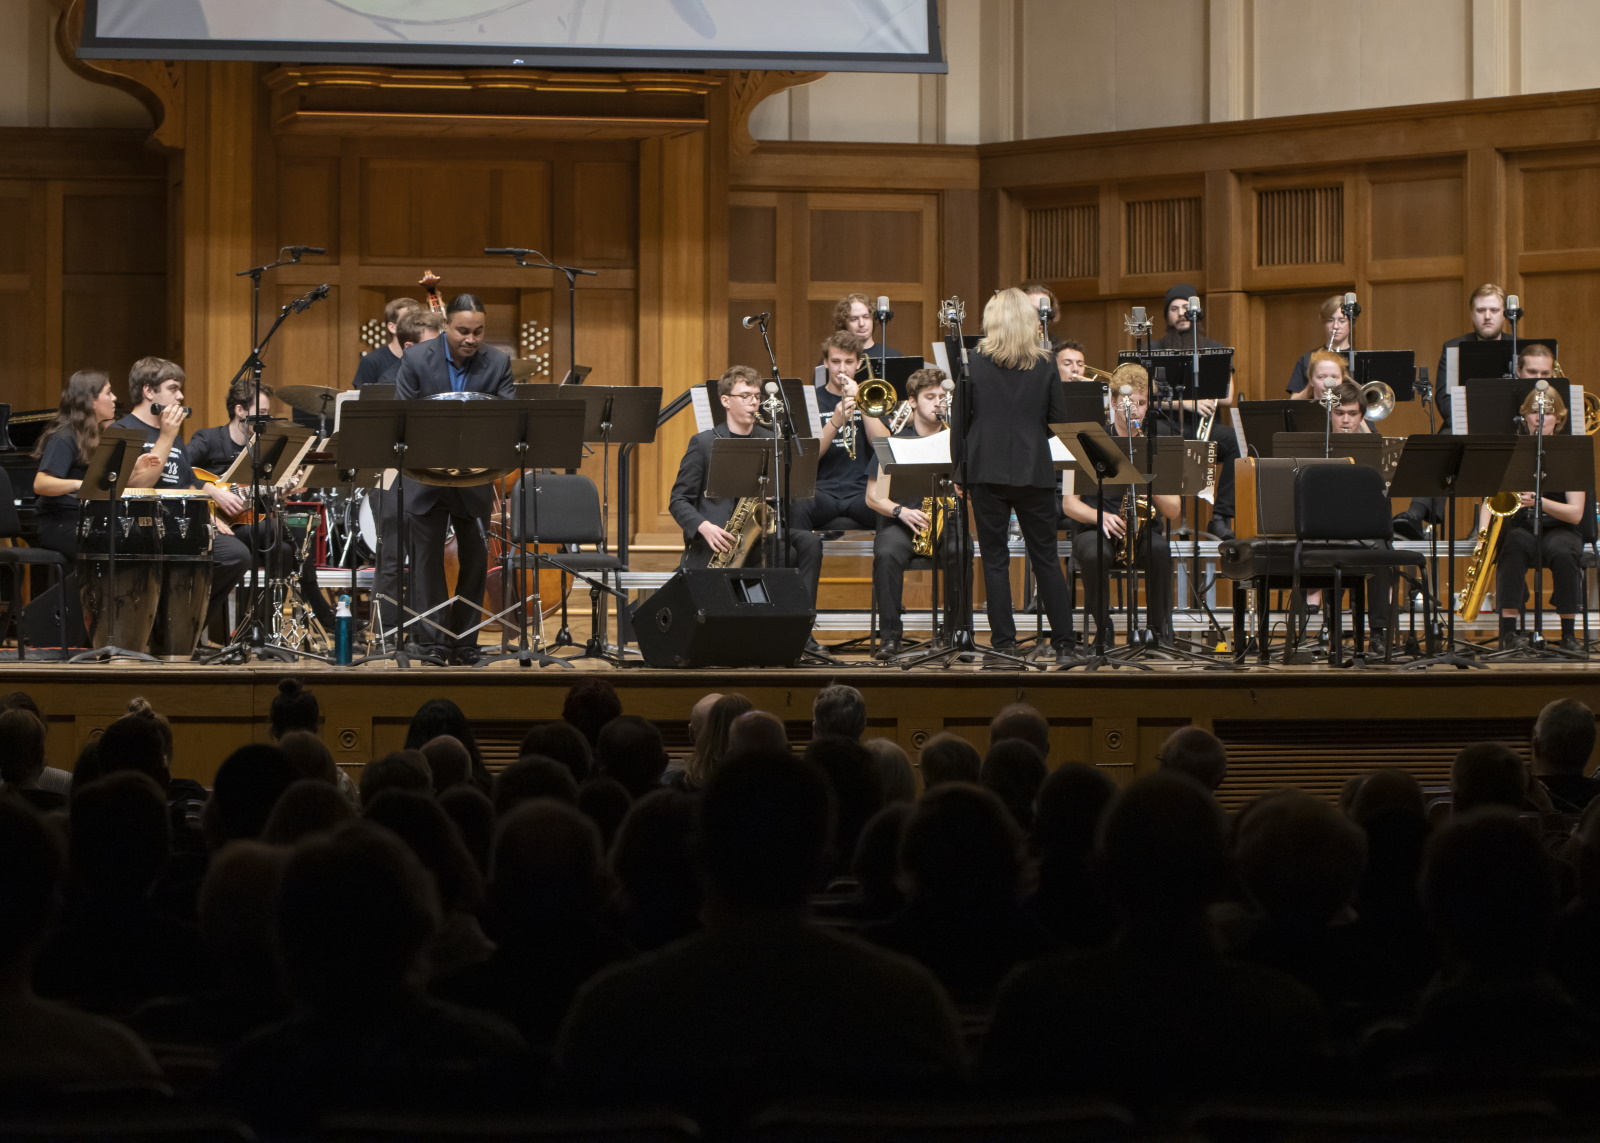 The Lawrence University Jazz Ensemble, led by Patty Darling, joined Liam Teague as part of a Jazz Celebration Weekend performance.